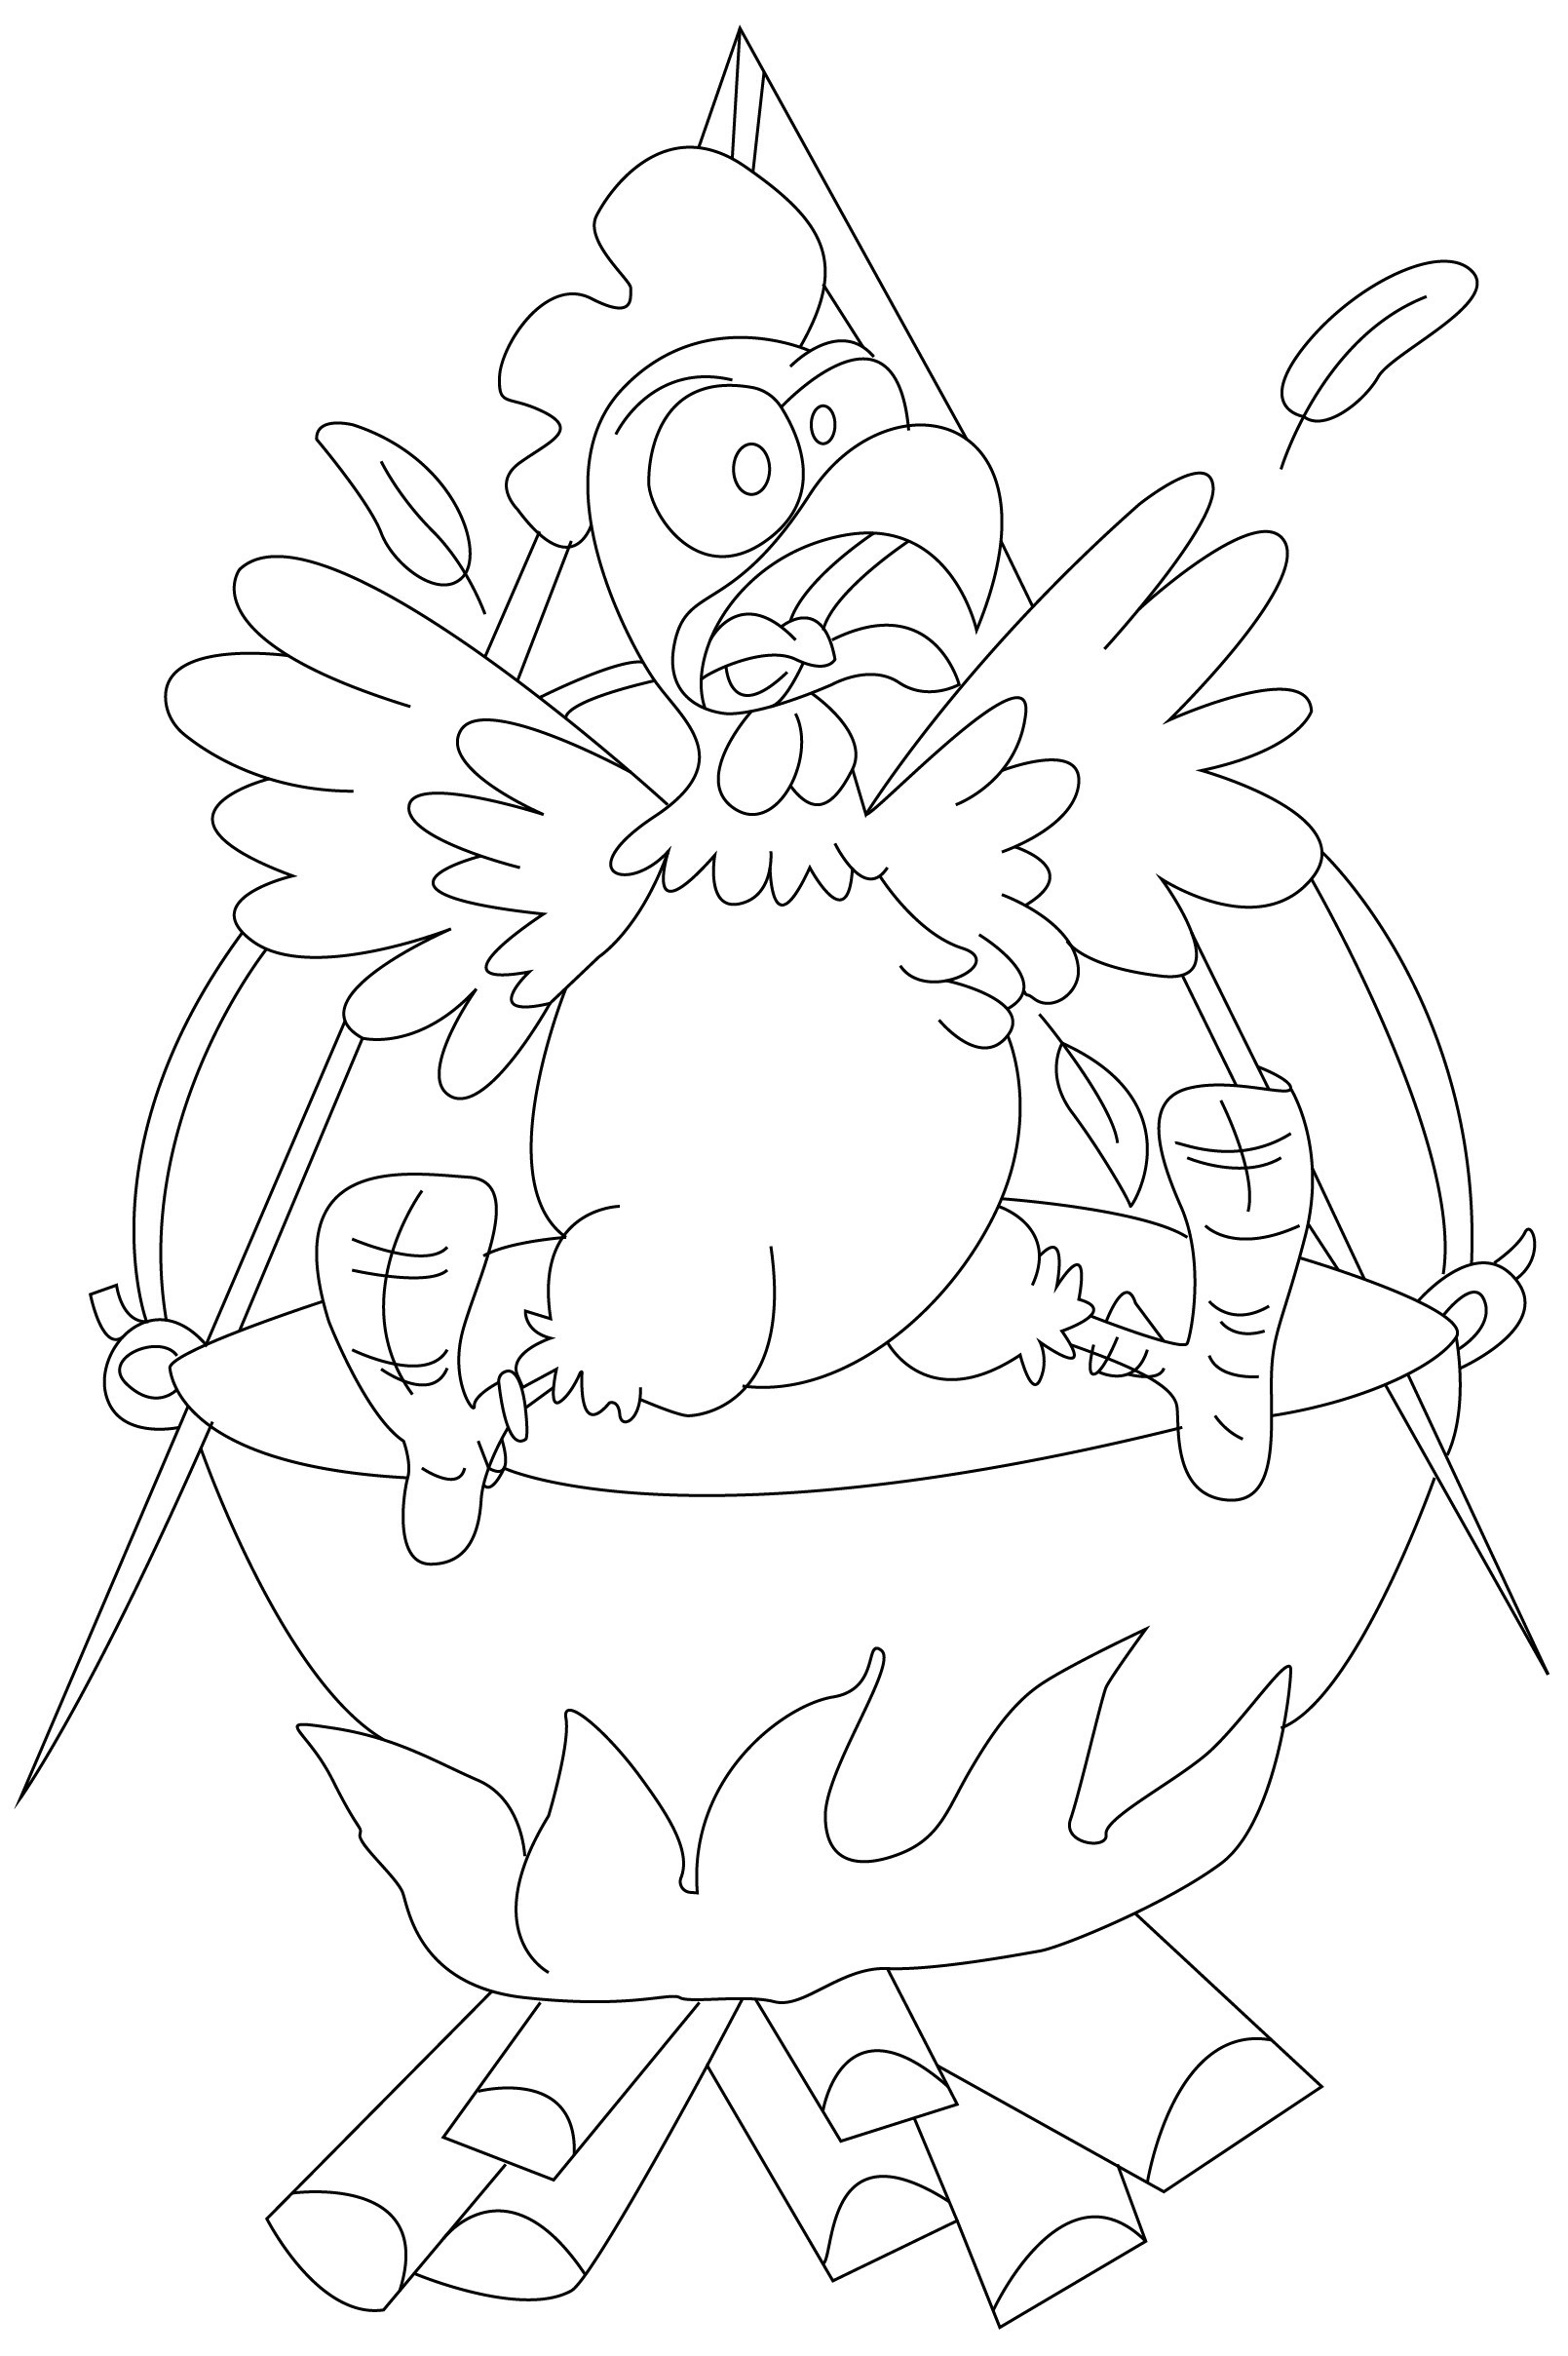 Coloring page of chicken in the pot for children